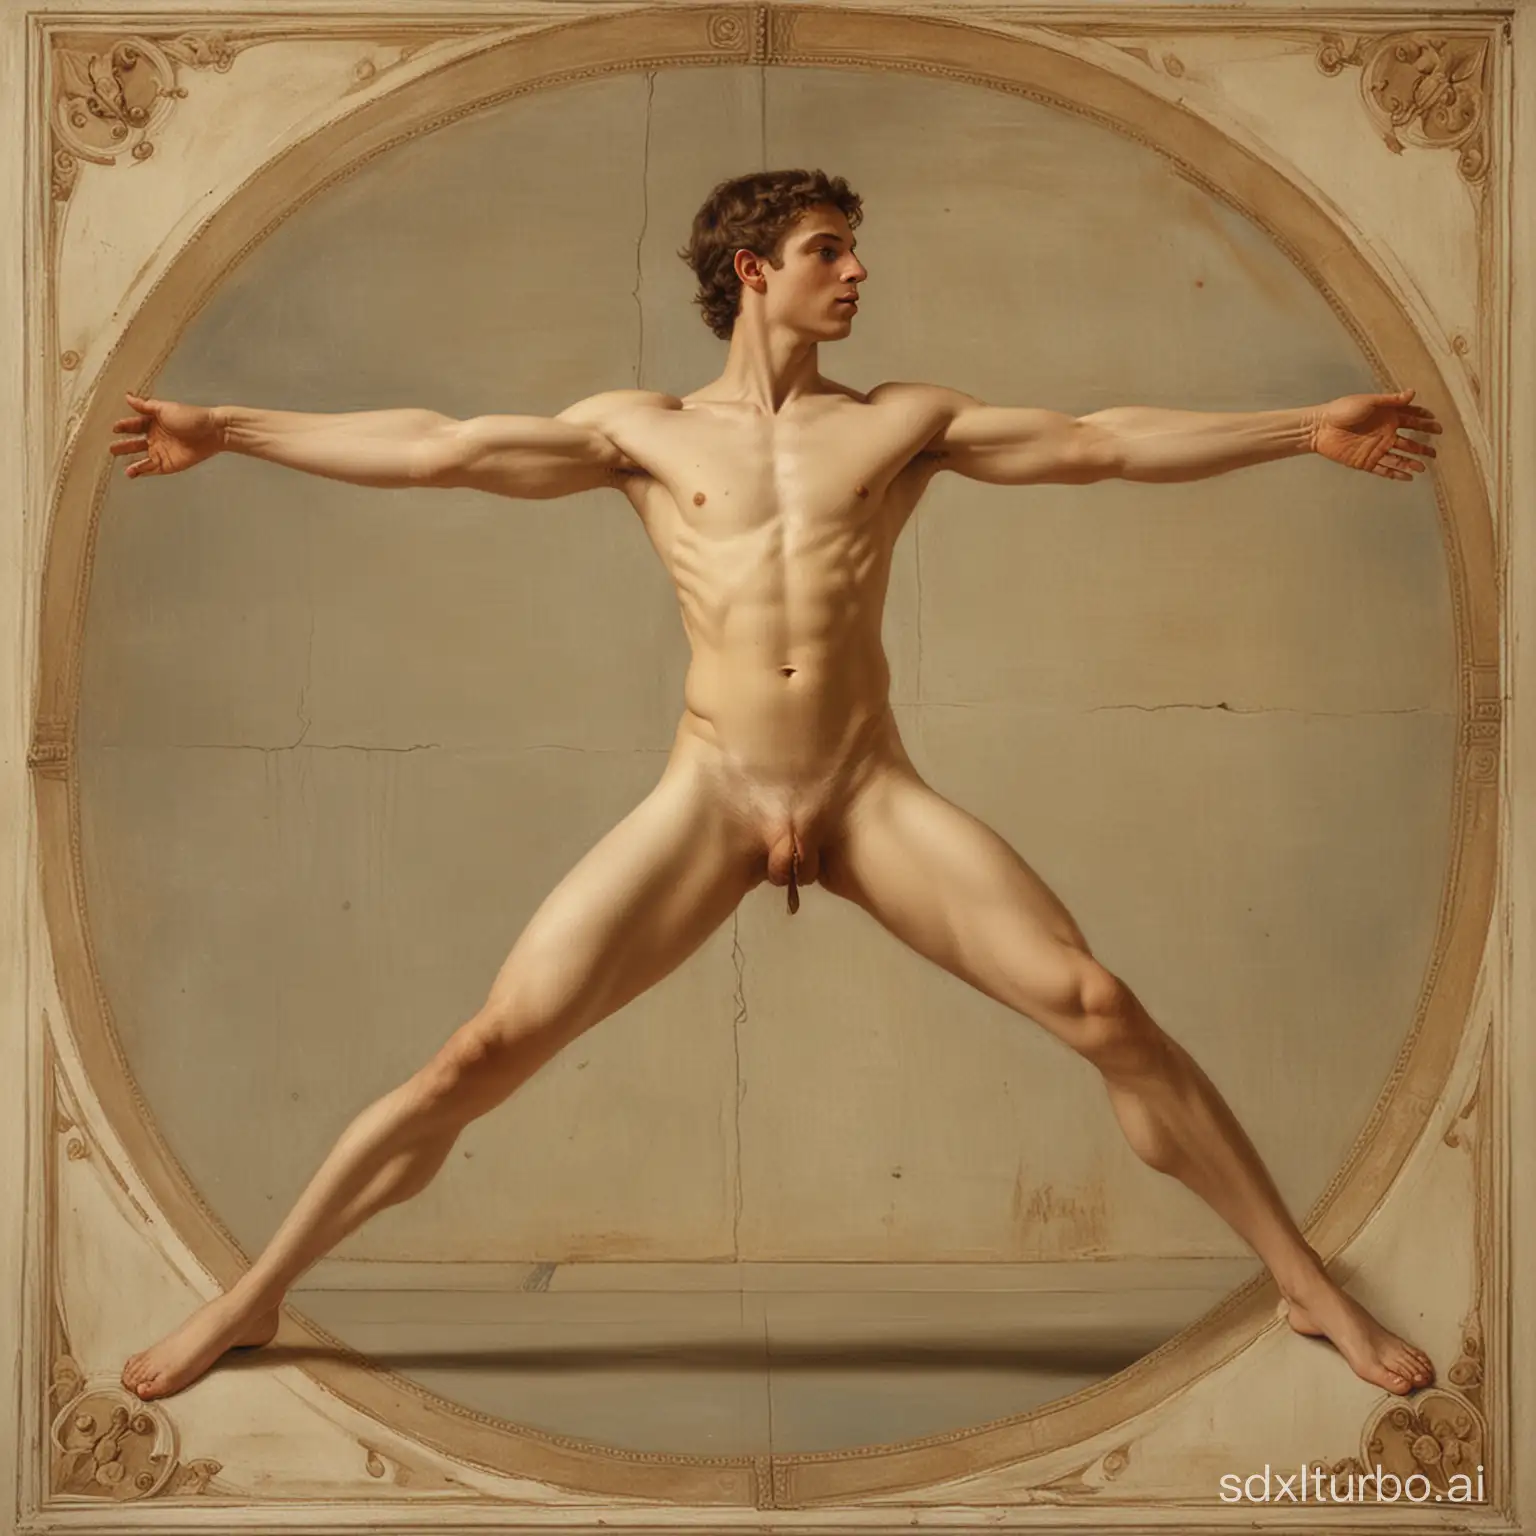 Renaissance-Inspired-Art-Dynamic-Pose-of-Naked-Young-Man-Performing-Splits